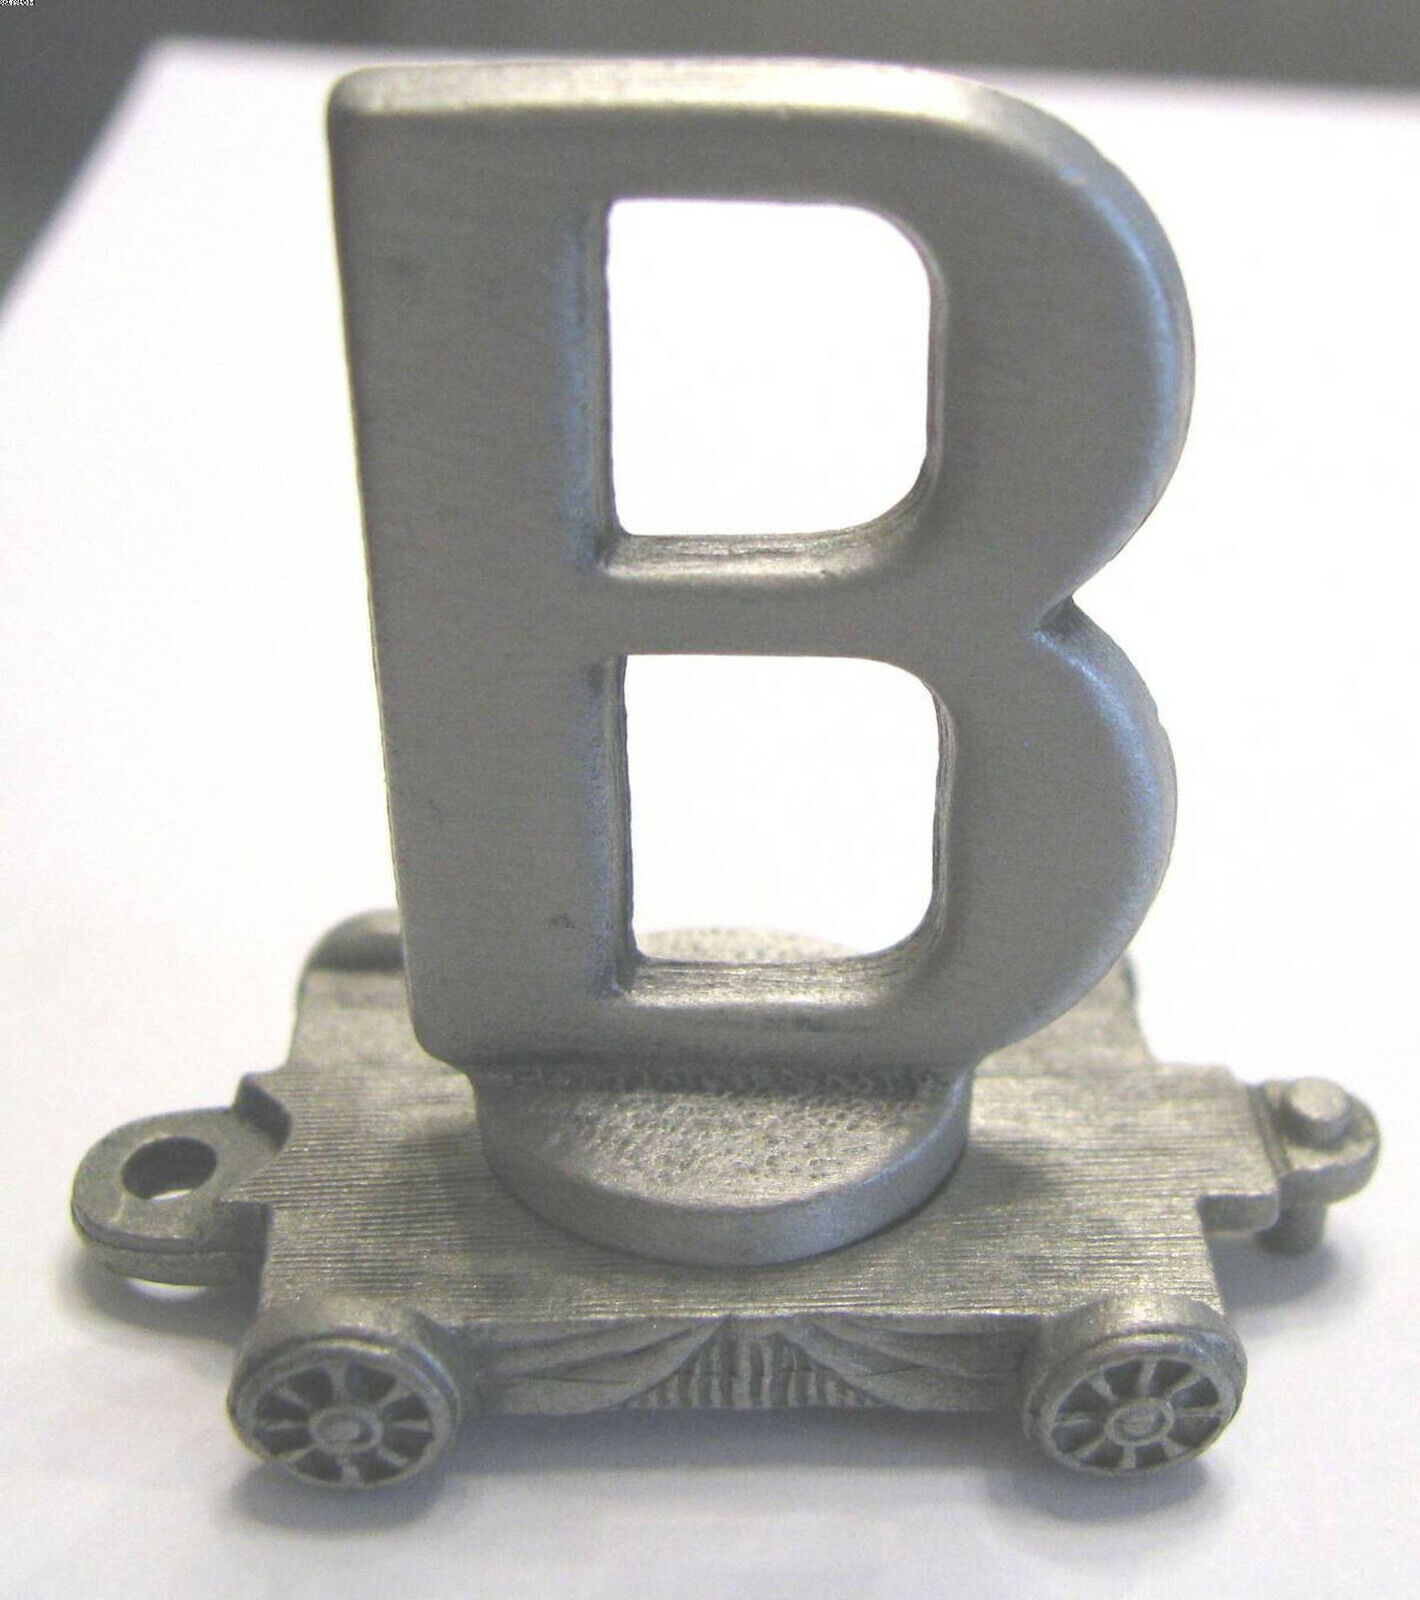 LETTER B FORT PEWTER - LASTING EXPRESSIONS PEWTER TRAIN CAR Vintage Miniature .